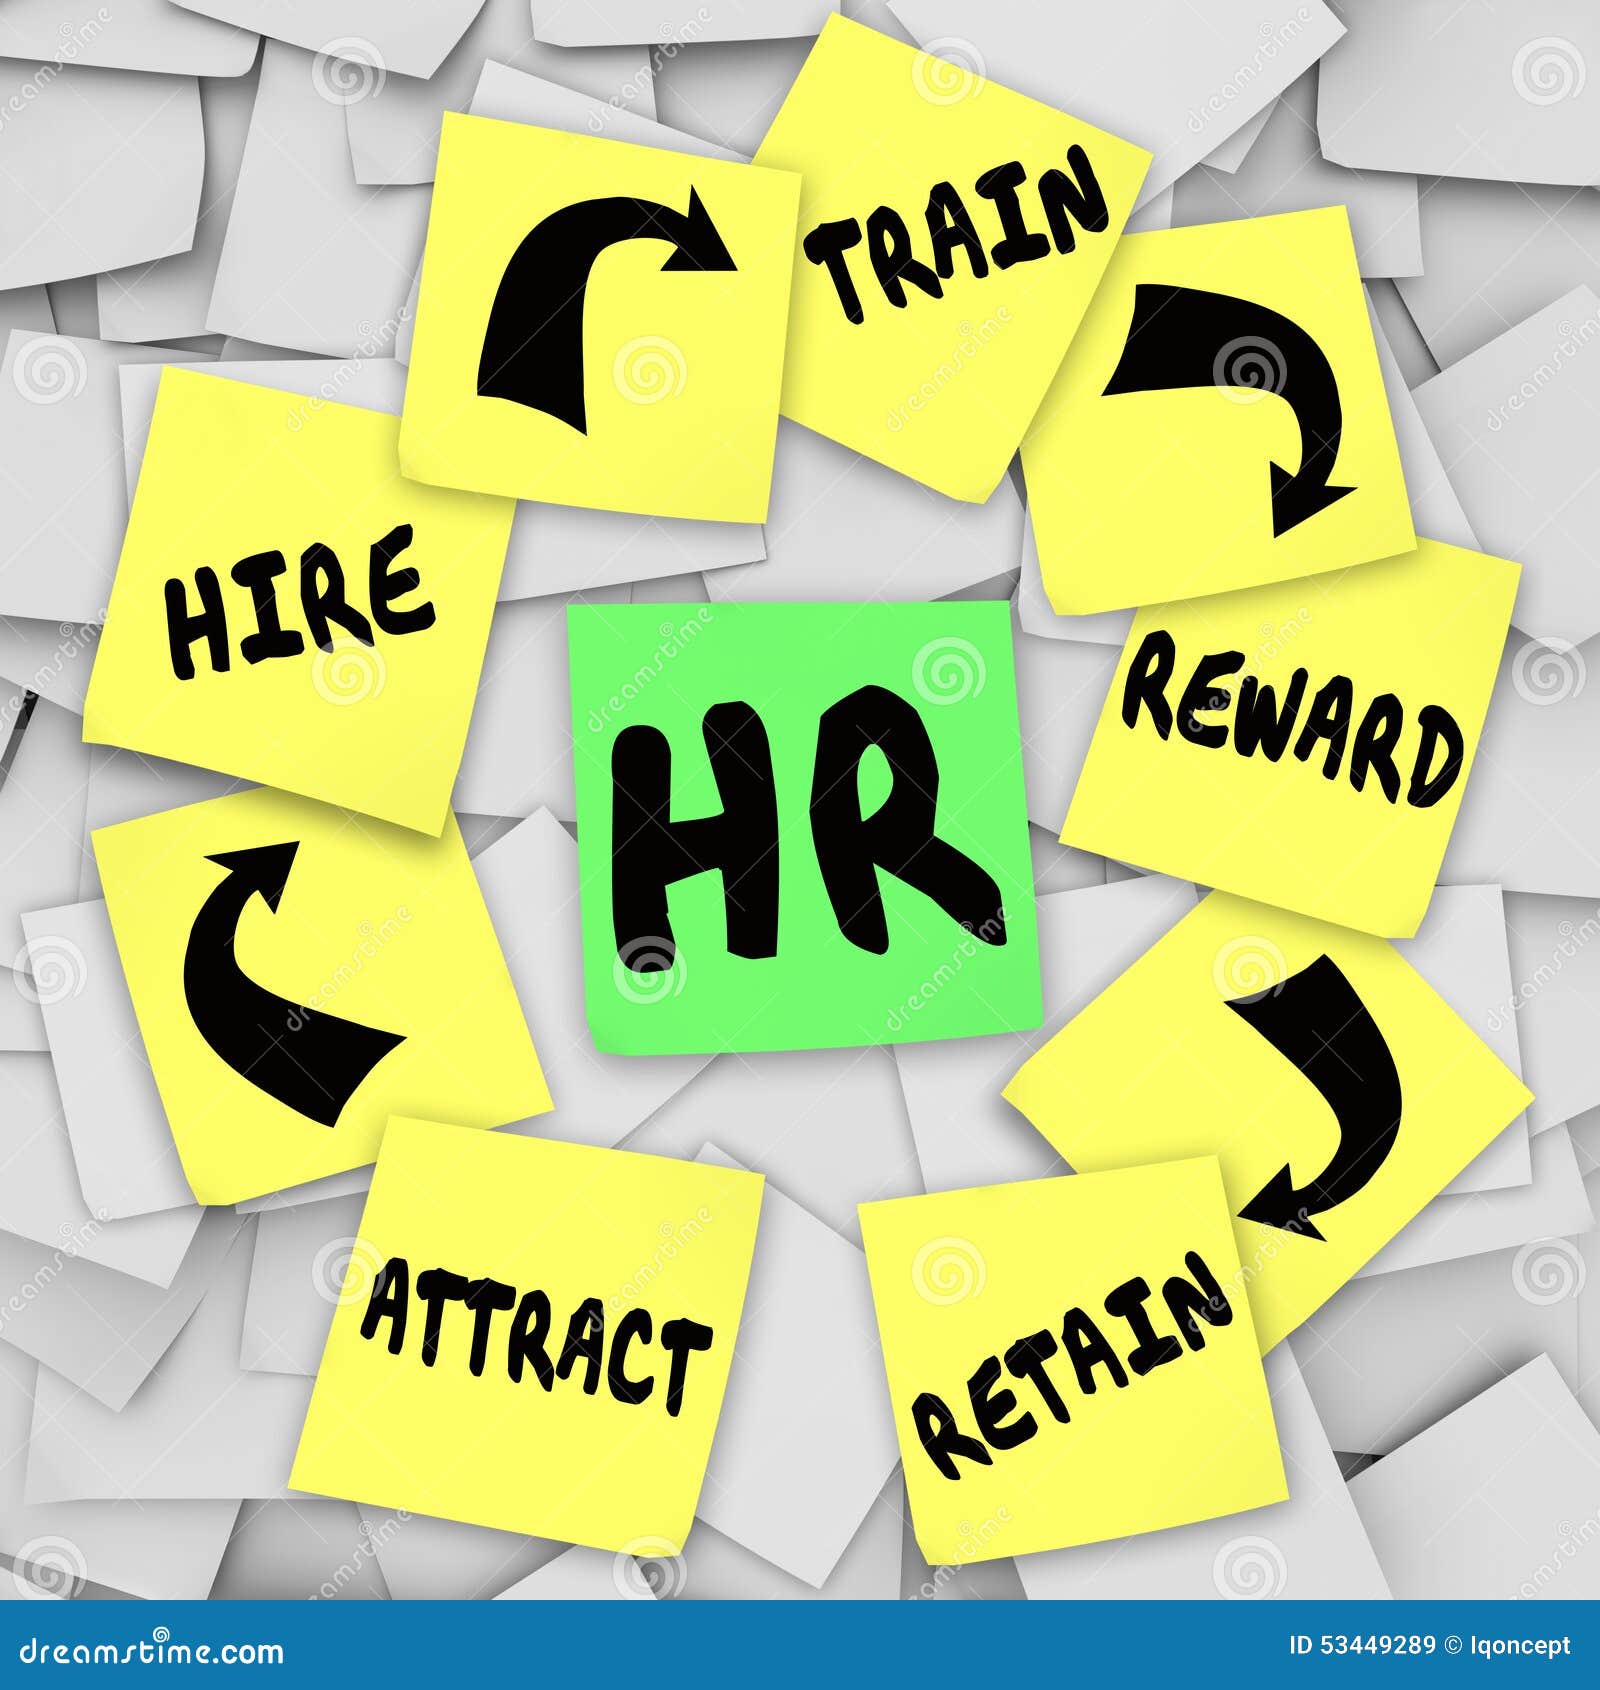 hr personnel sticky notes attract hire train reward retain workers